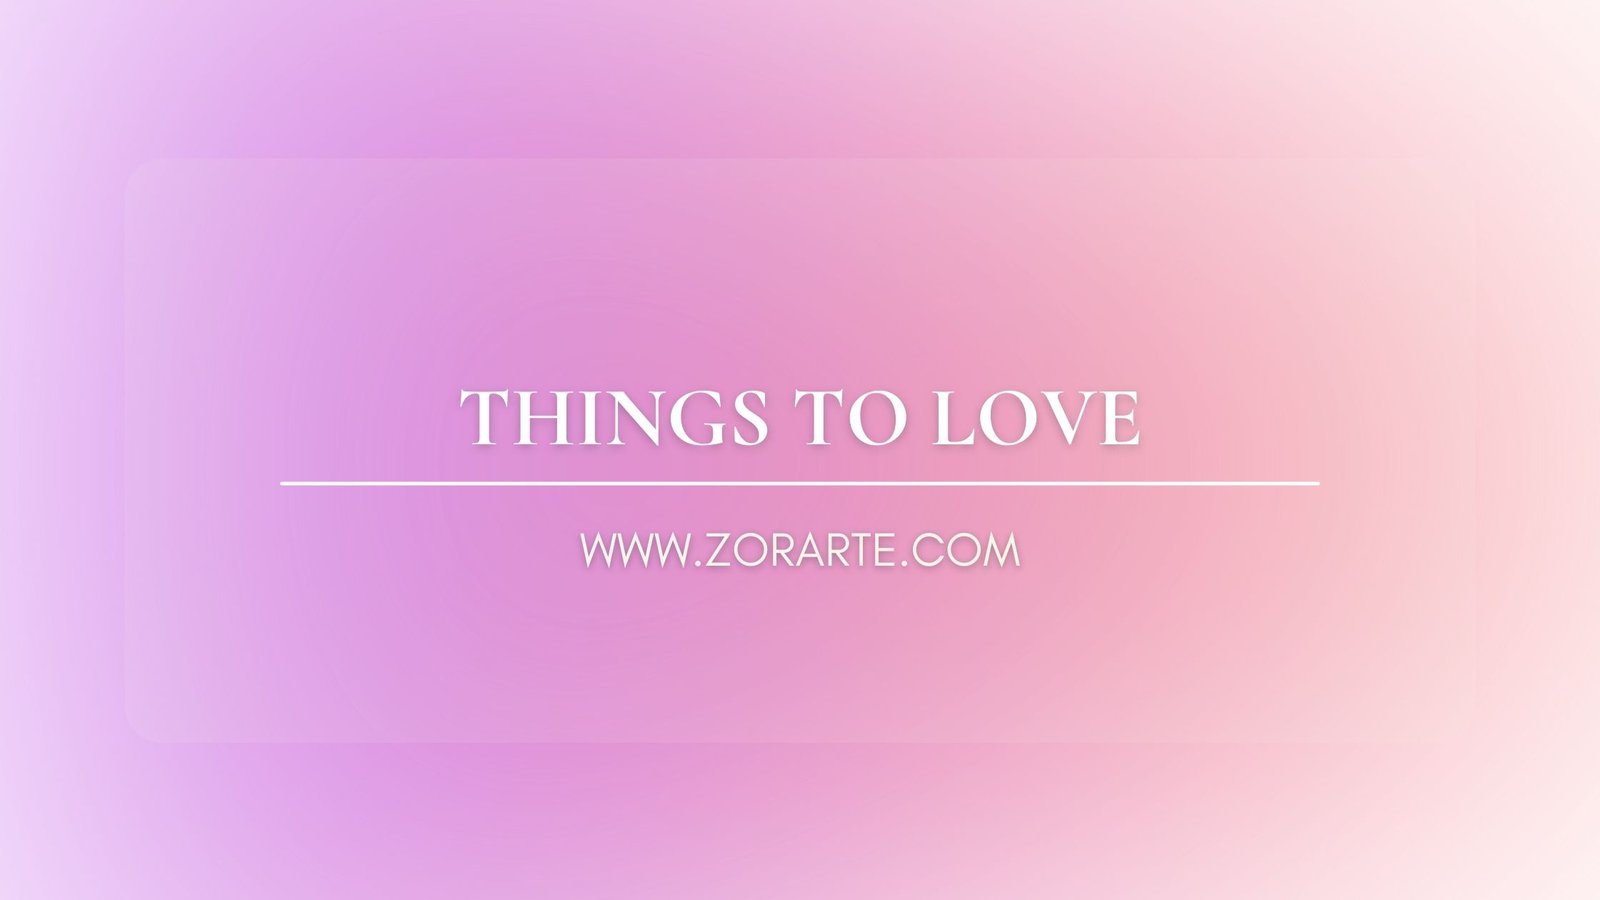 Things to LOVE